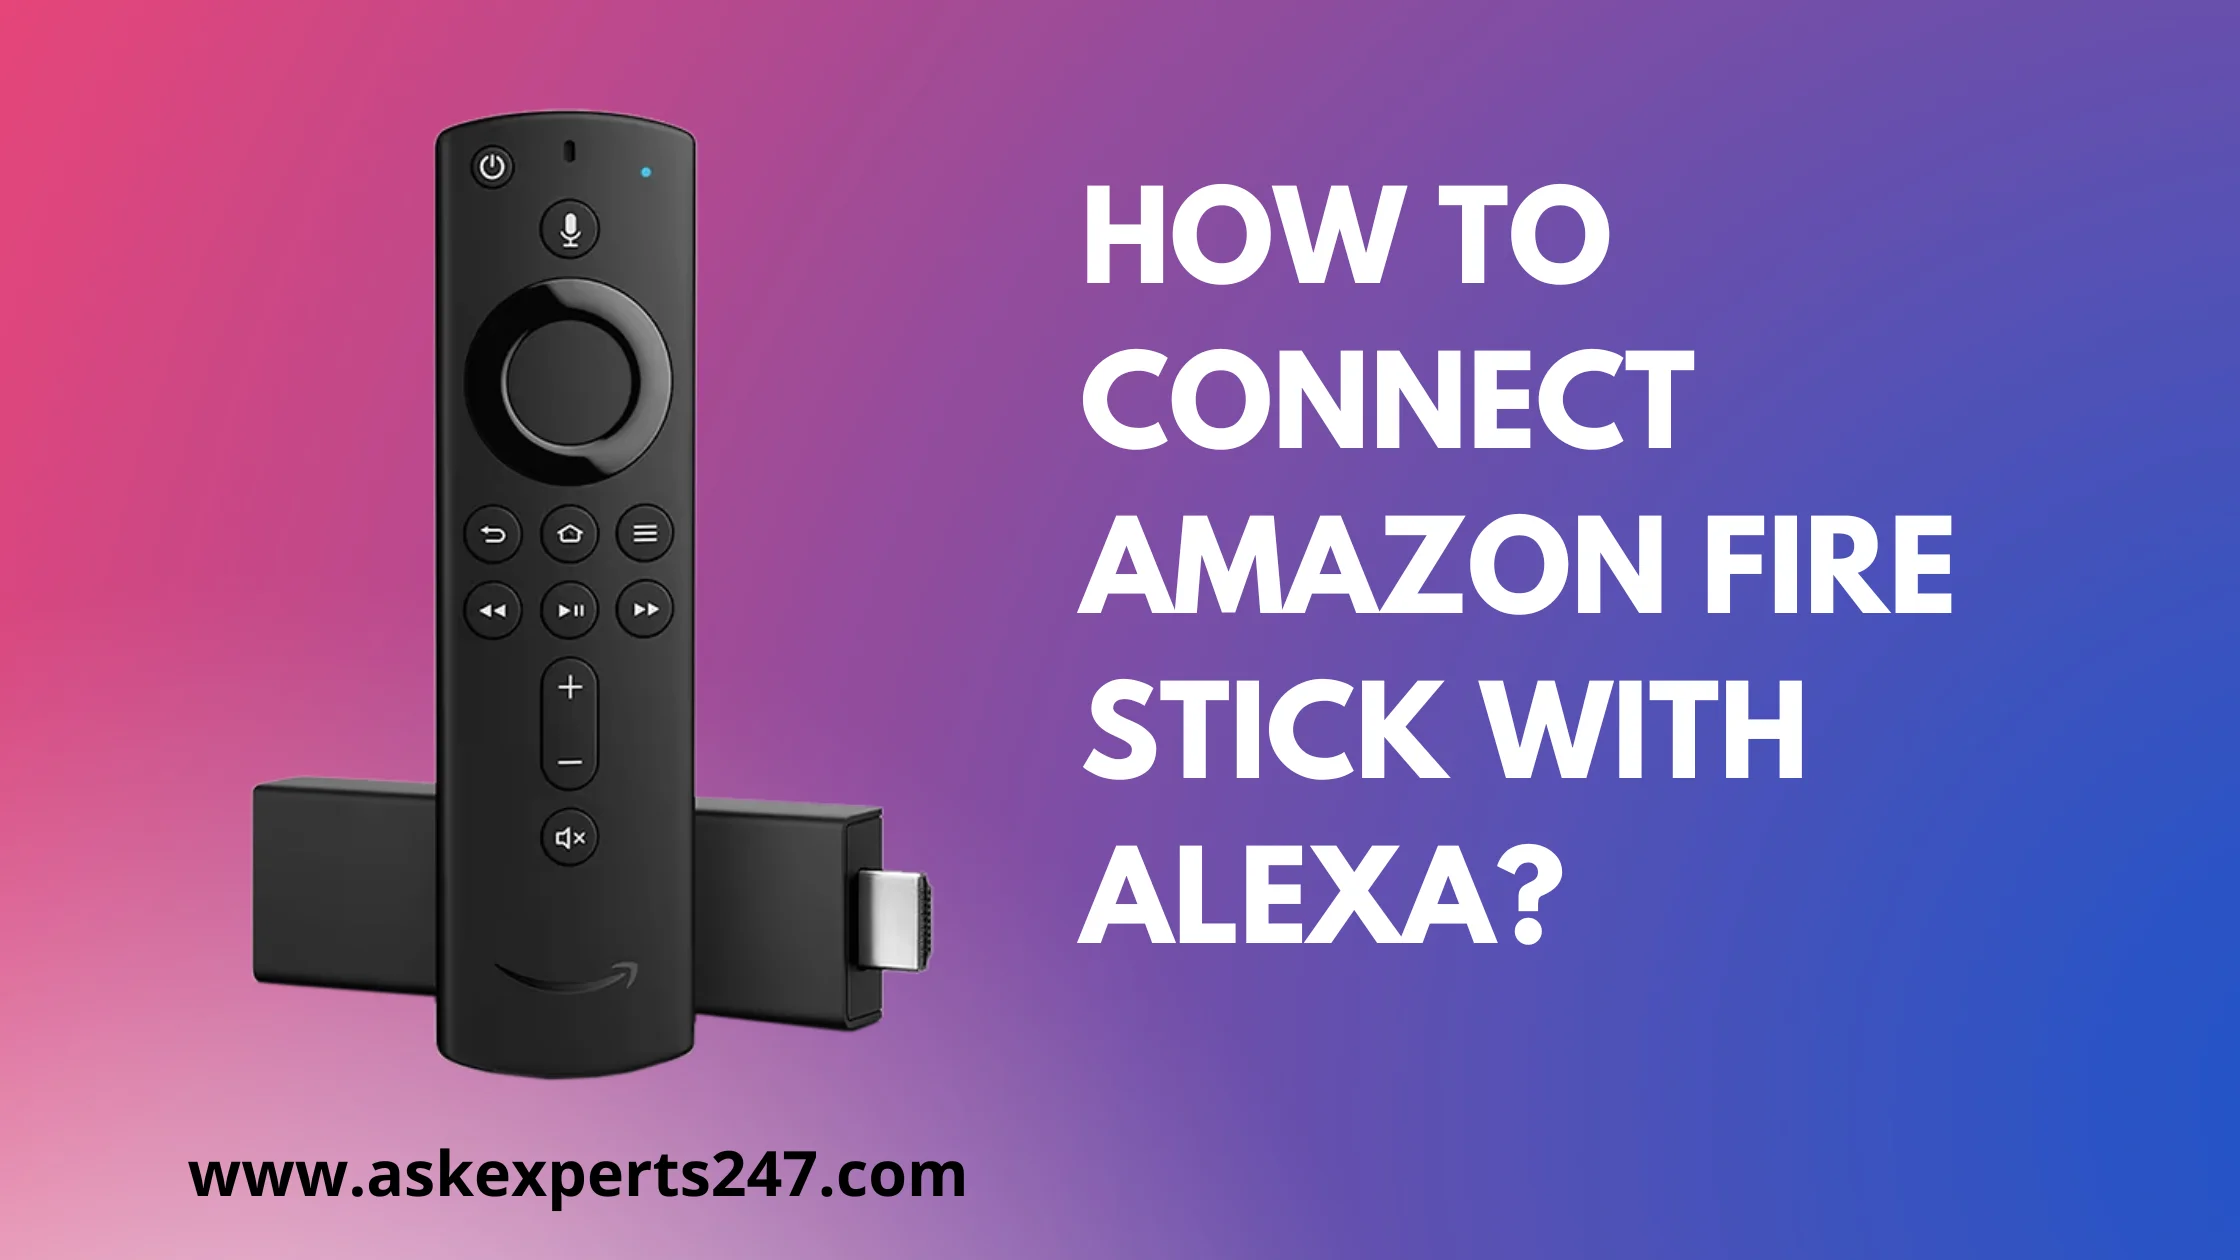 How to Connect Amazon Fire Stick with Alexa